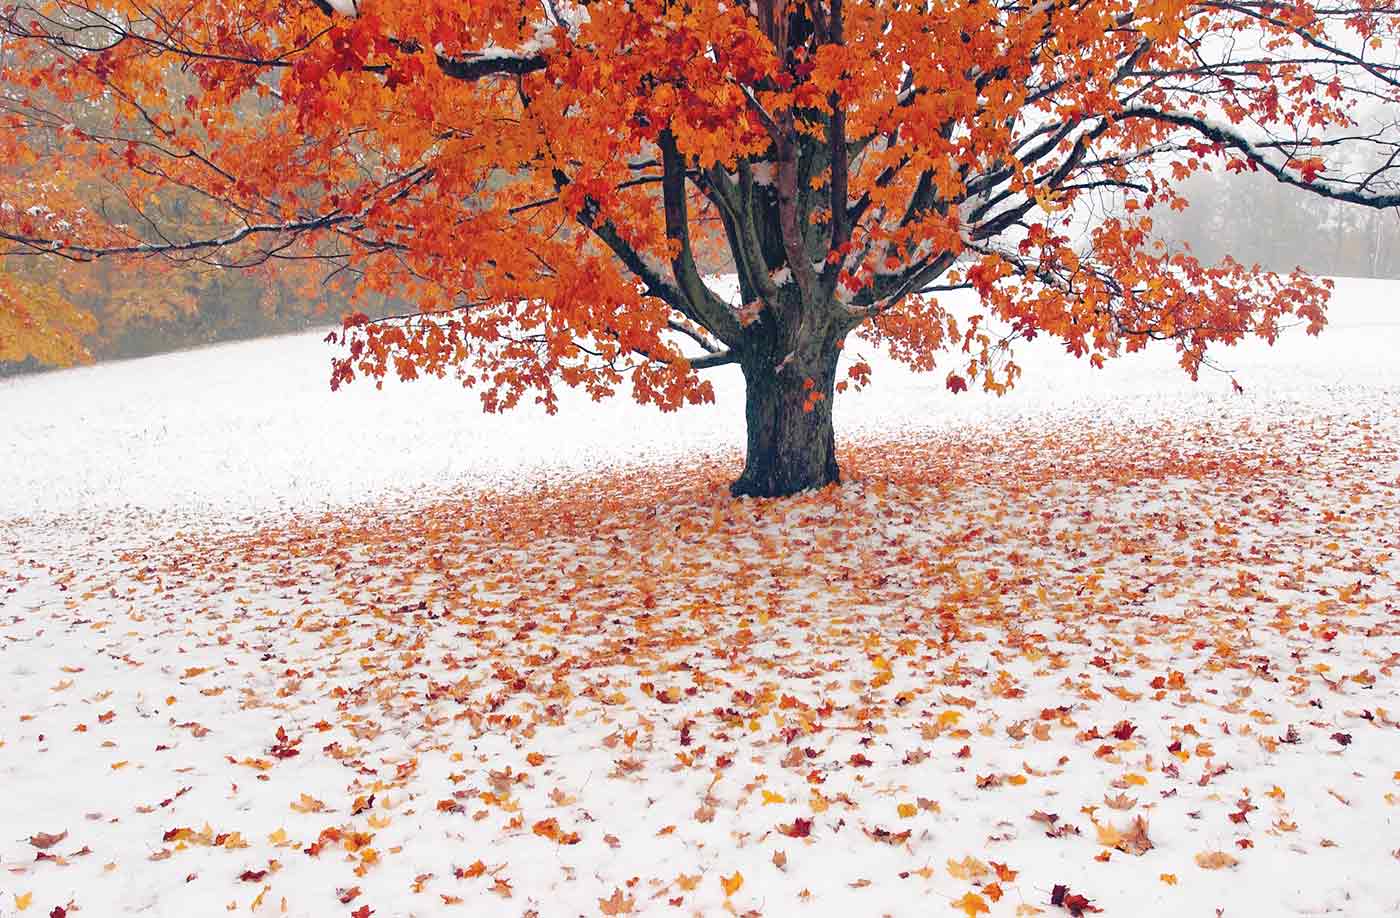 Bright orange and red fall maple tree on a hill with dropped leaves on an early snowfall.